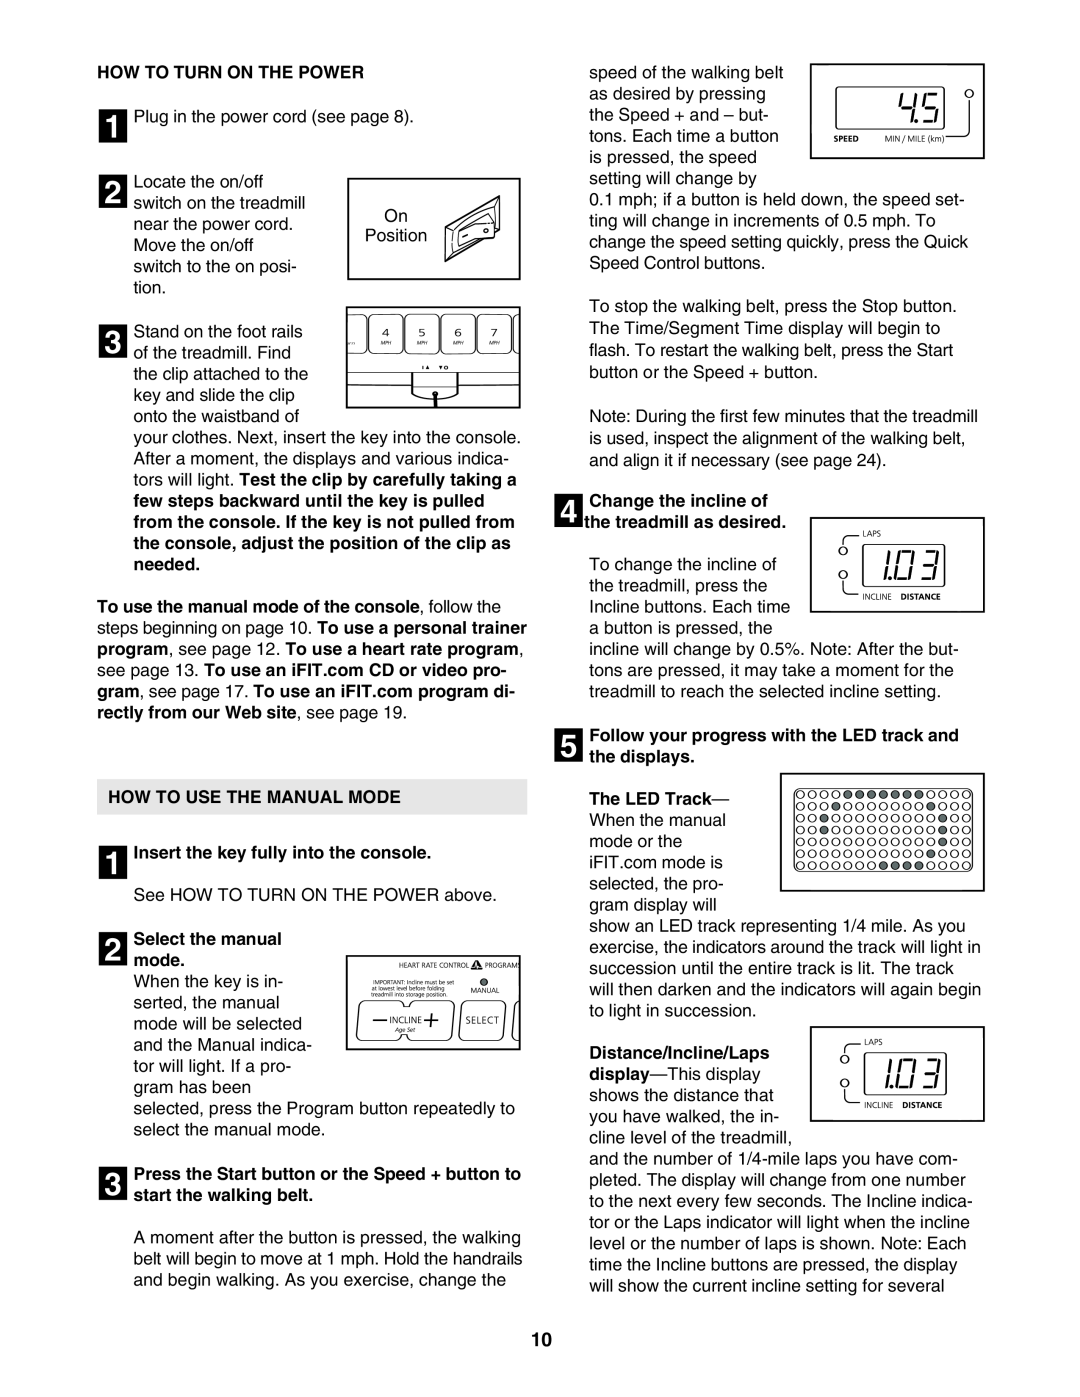 ProForm HGTL09111O user manual How To Turn On The Power, HOW TO USE THE MANUAL MODE 1 Insert the key fully into the console 